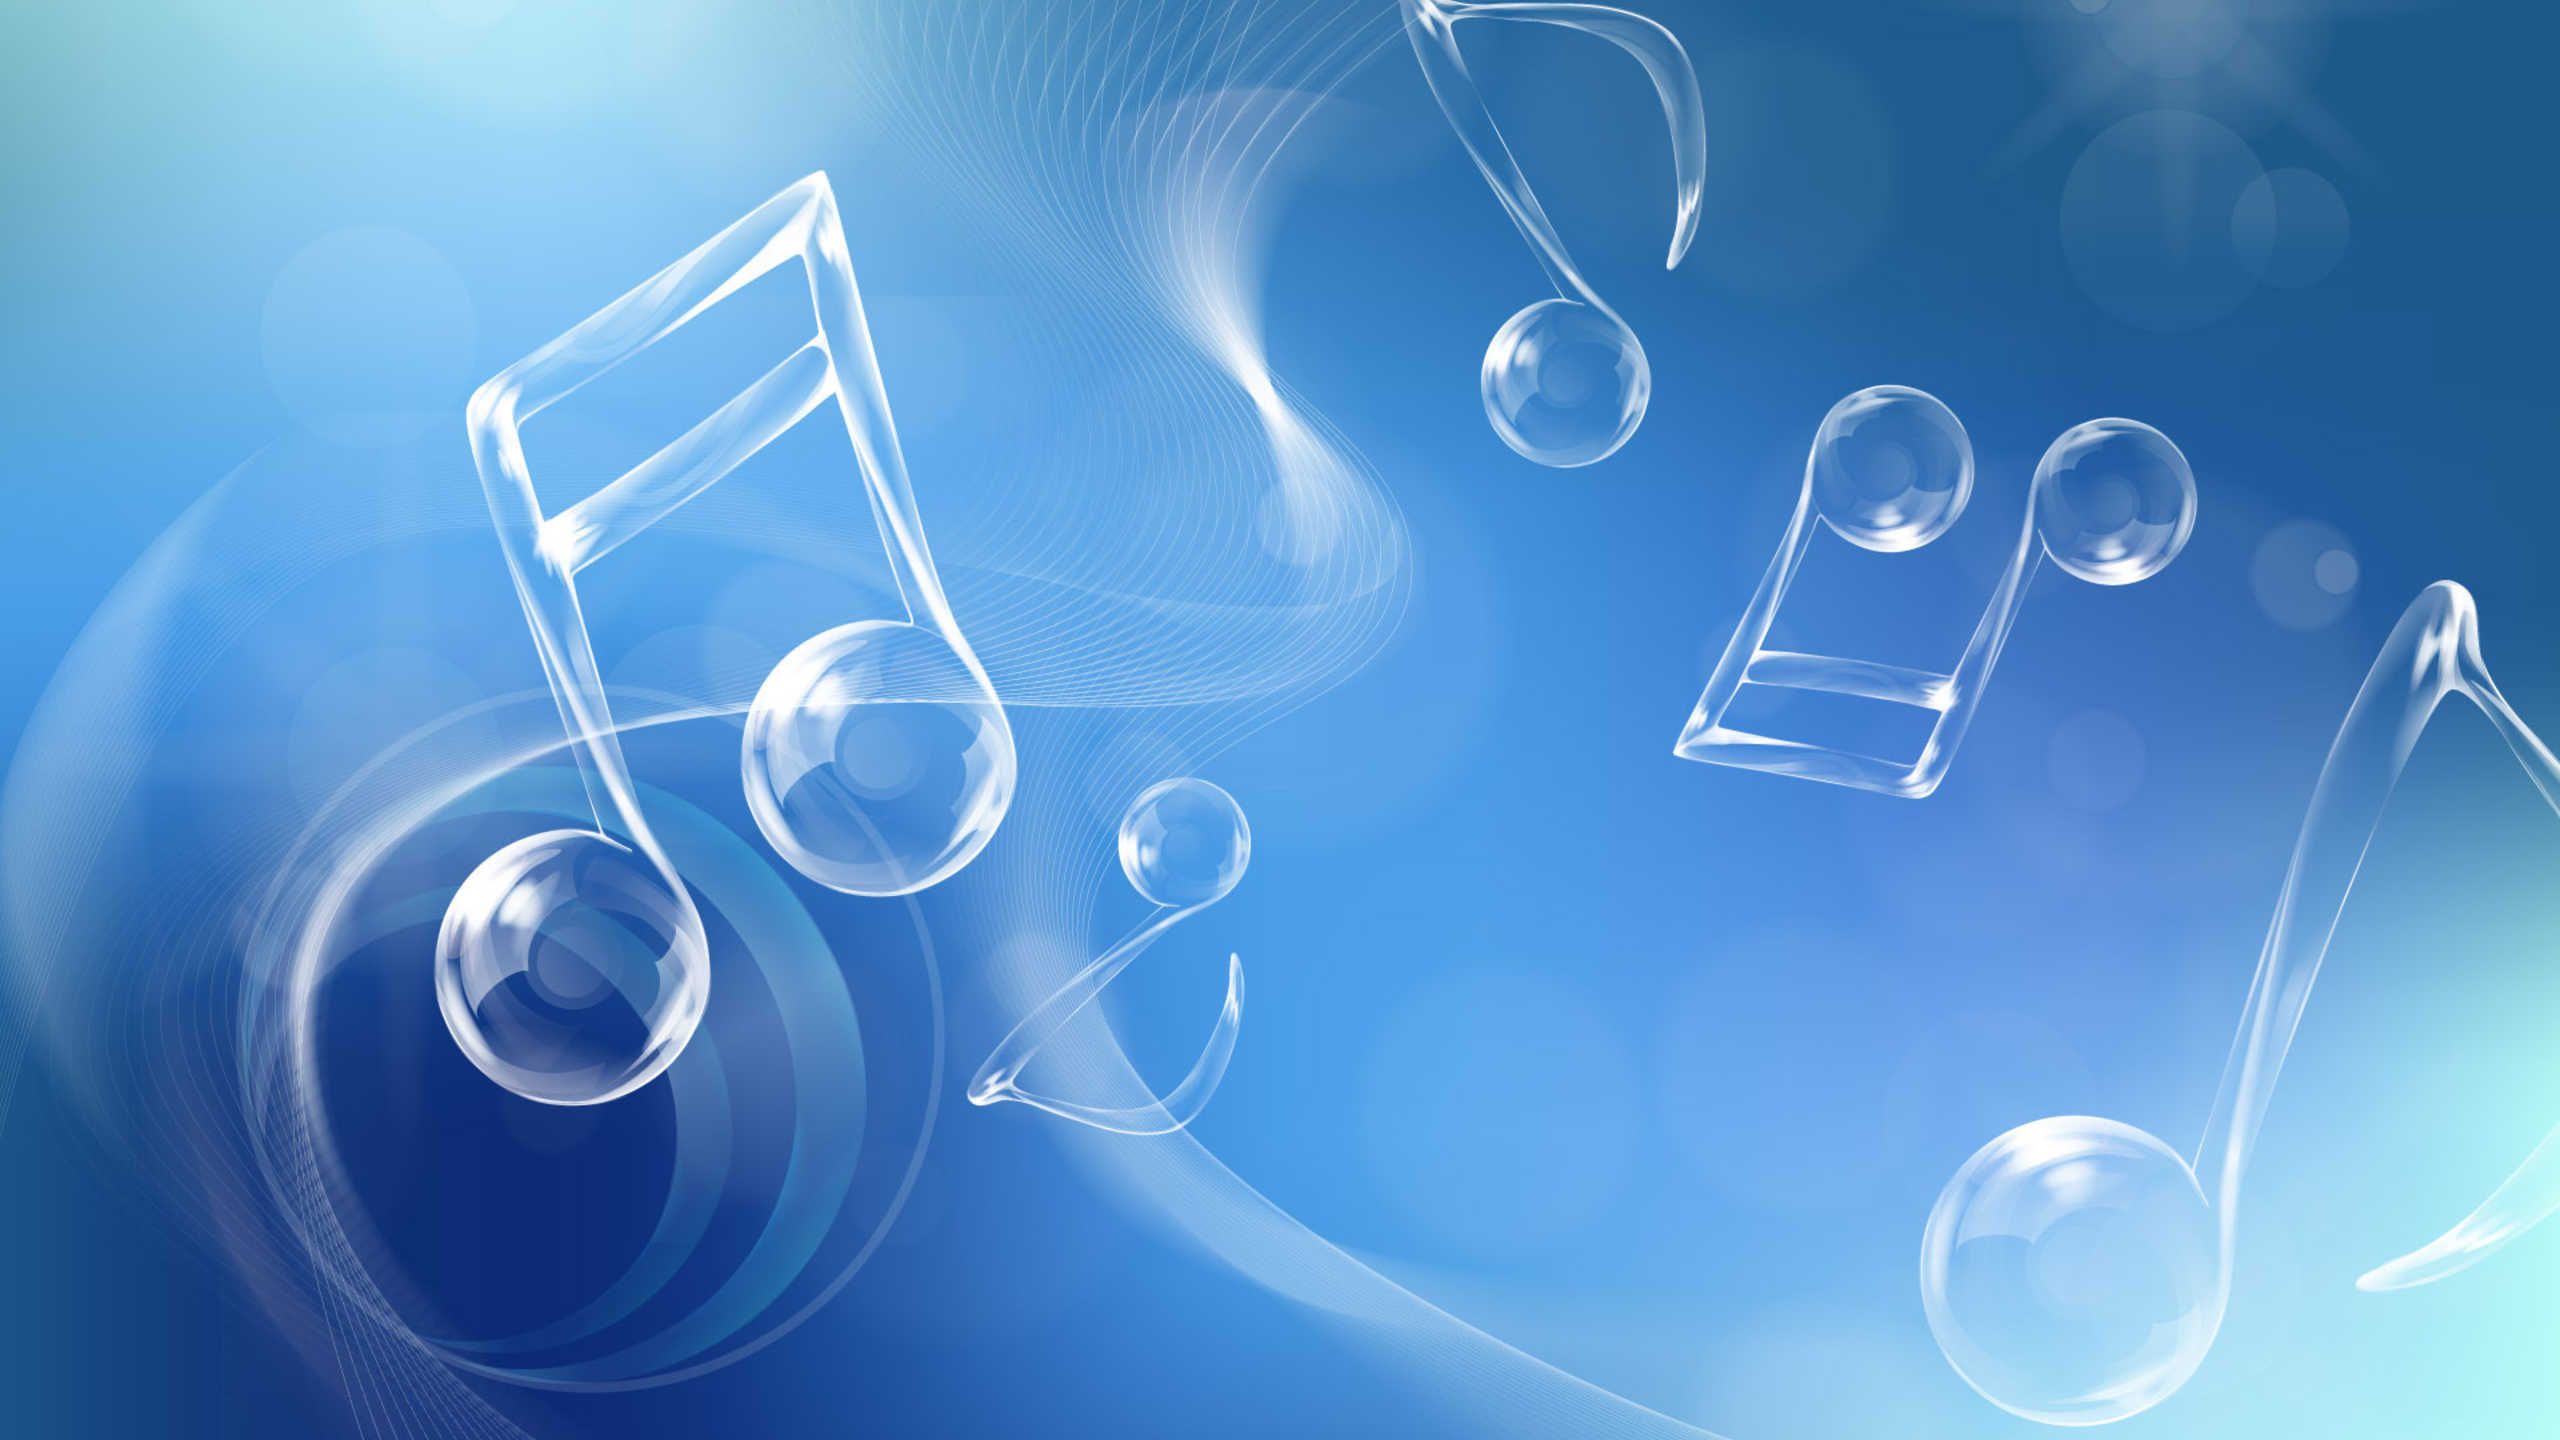 music-is-the-voice-of-the-soul-notes-in-the-air-2560x1440.jpg